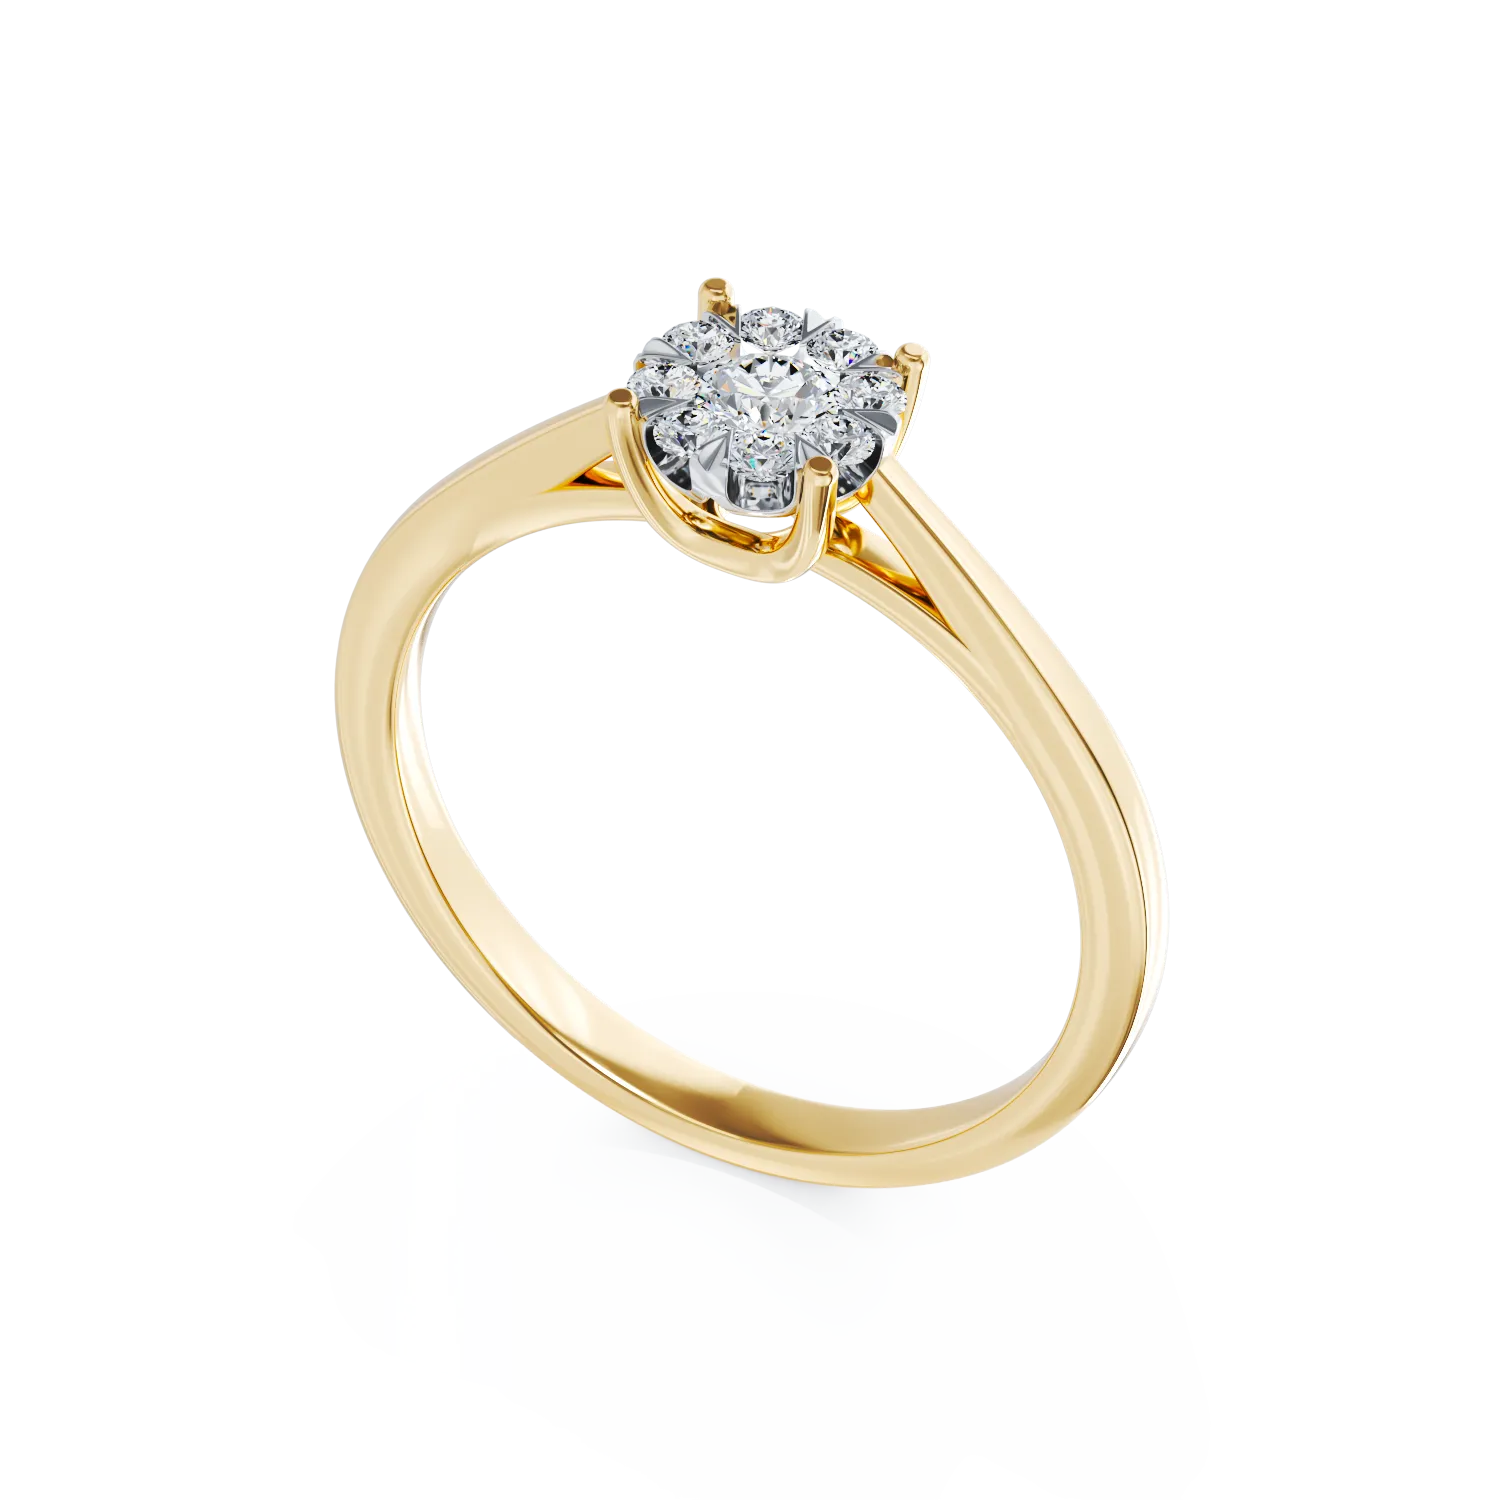 18K yellow gold engagement ring with 0.34ct diamonds